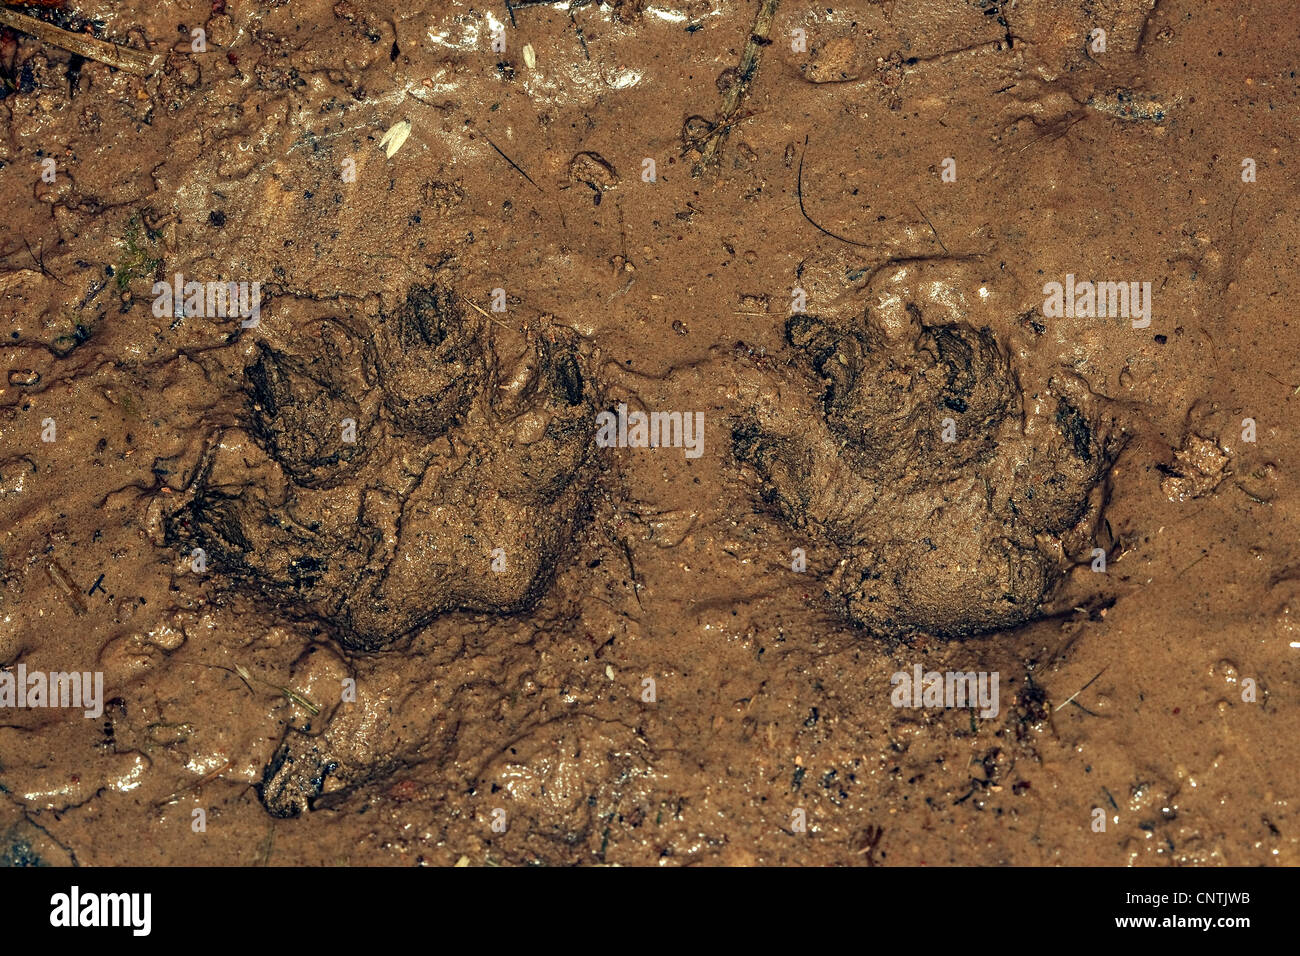 raccoon dog (Nyctereutes procyonoides), tracks in the mud, Germany Stock Photo